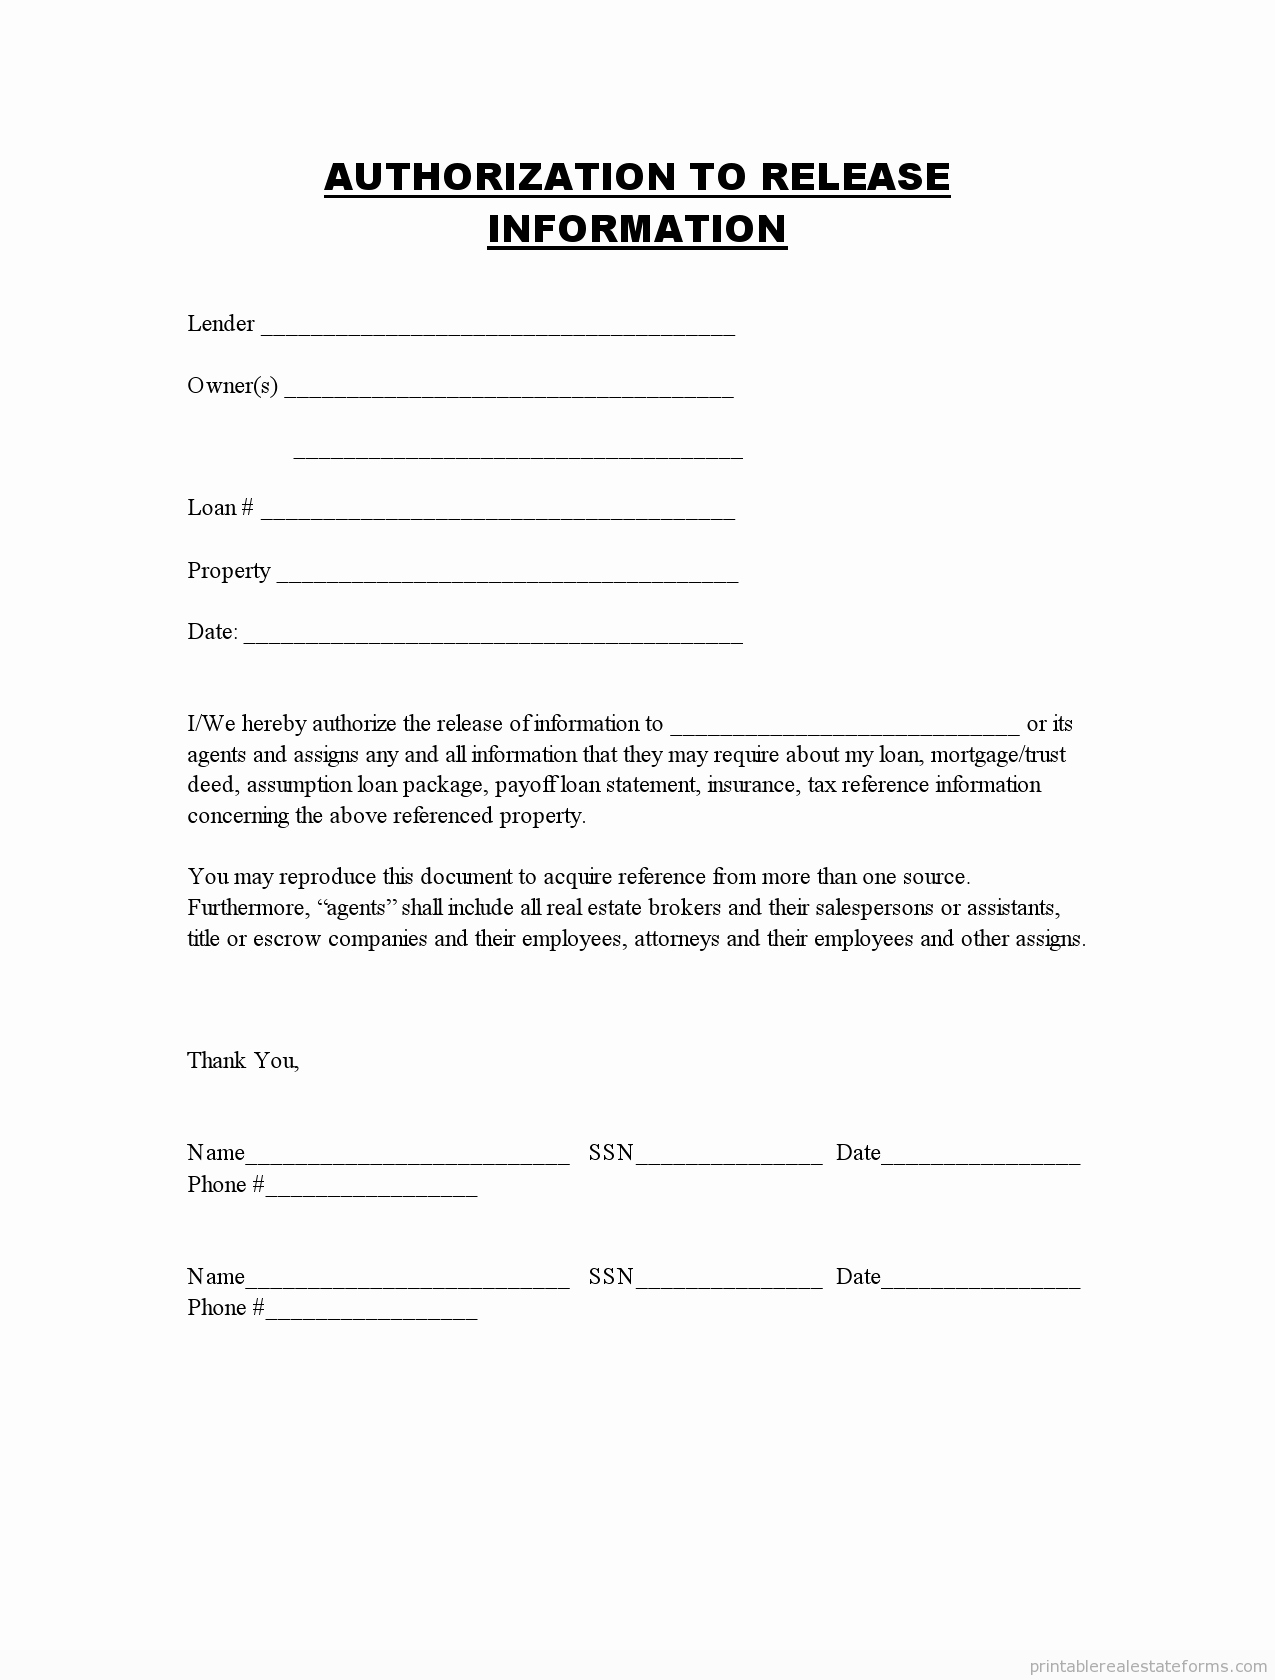 Information form Template Best Of Release Information forms Printable Blank Template